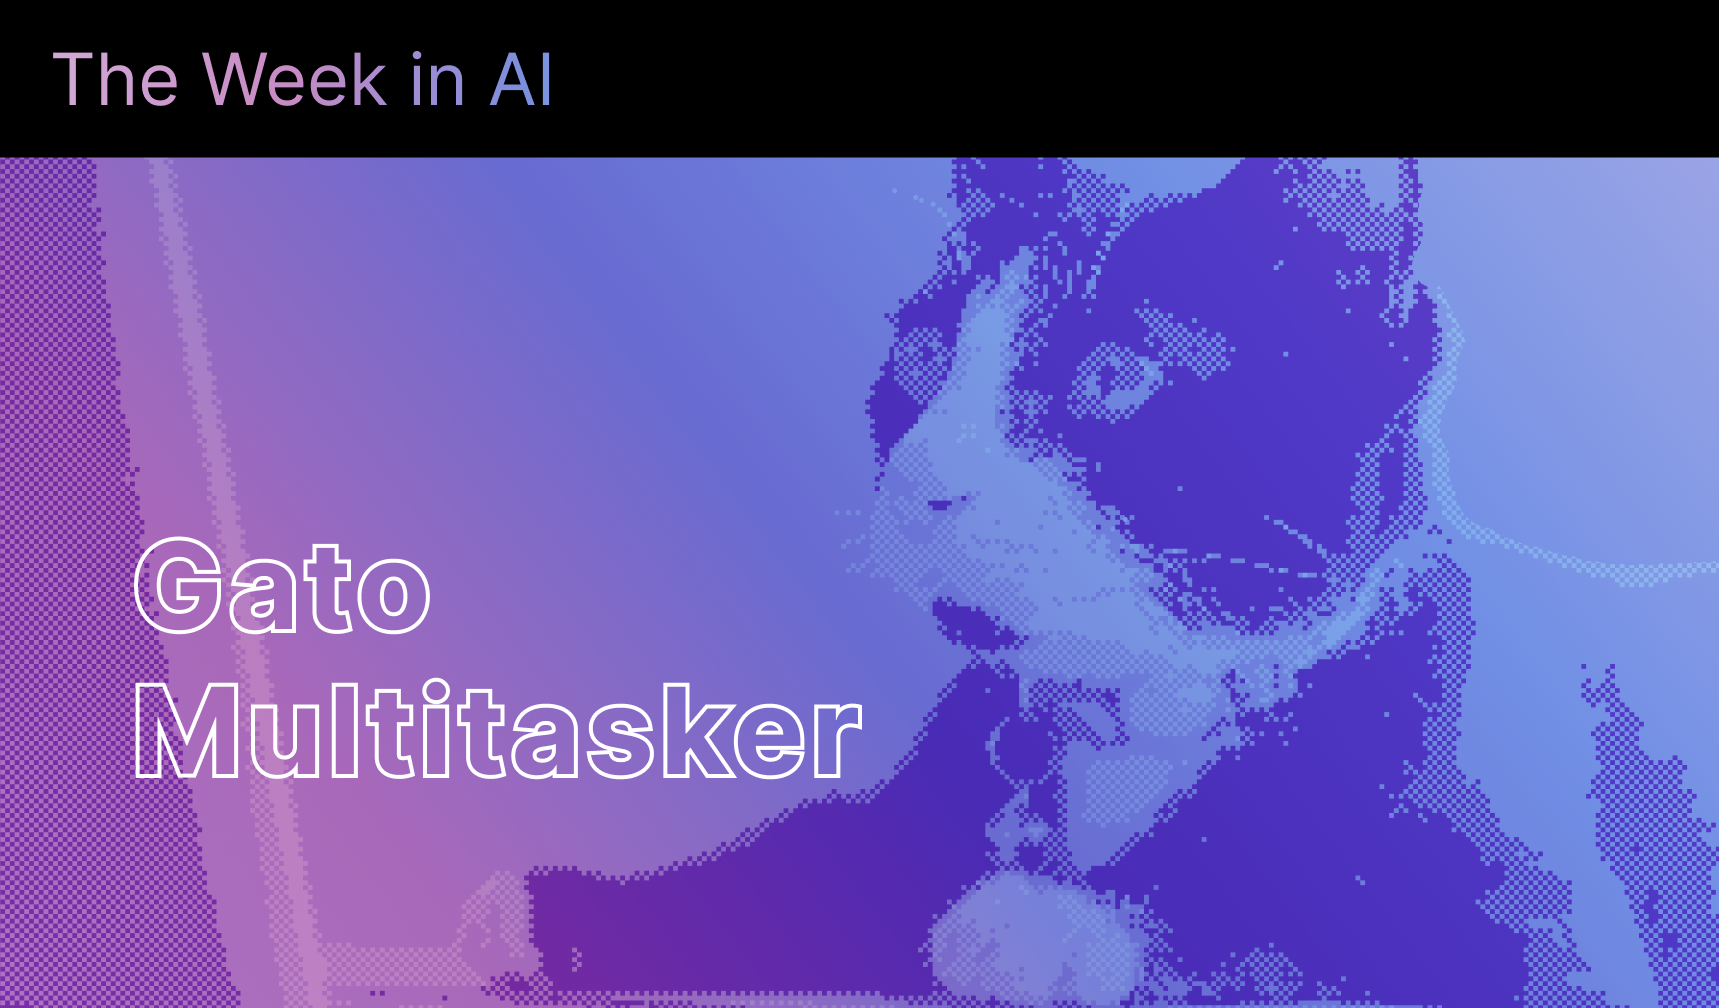 The Week in AI: A Gato Multitasker, LSTM Comeback, ML SuperCluster, Heart Disease Detector